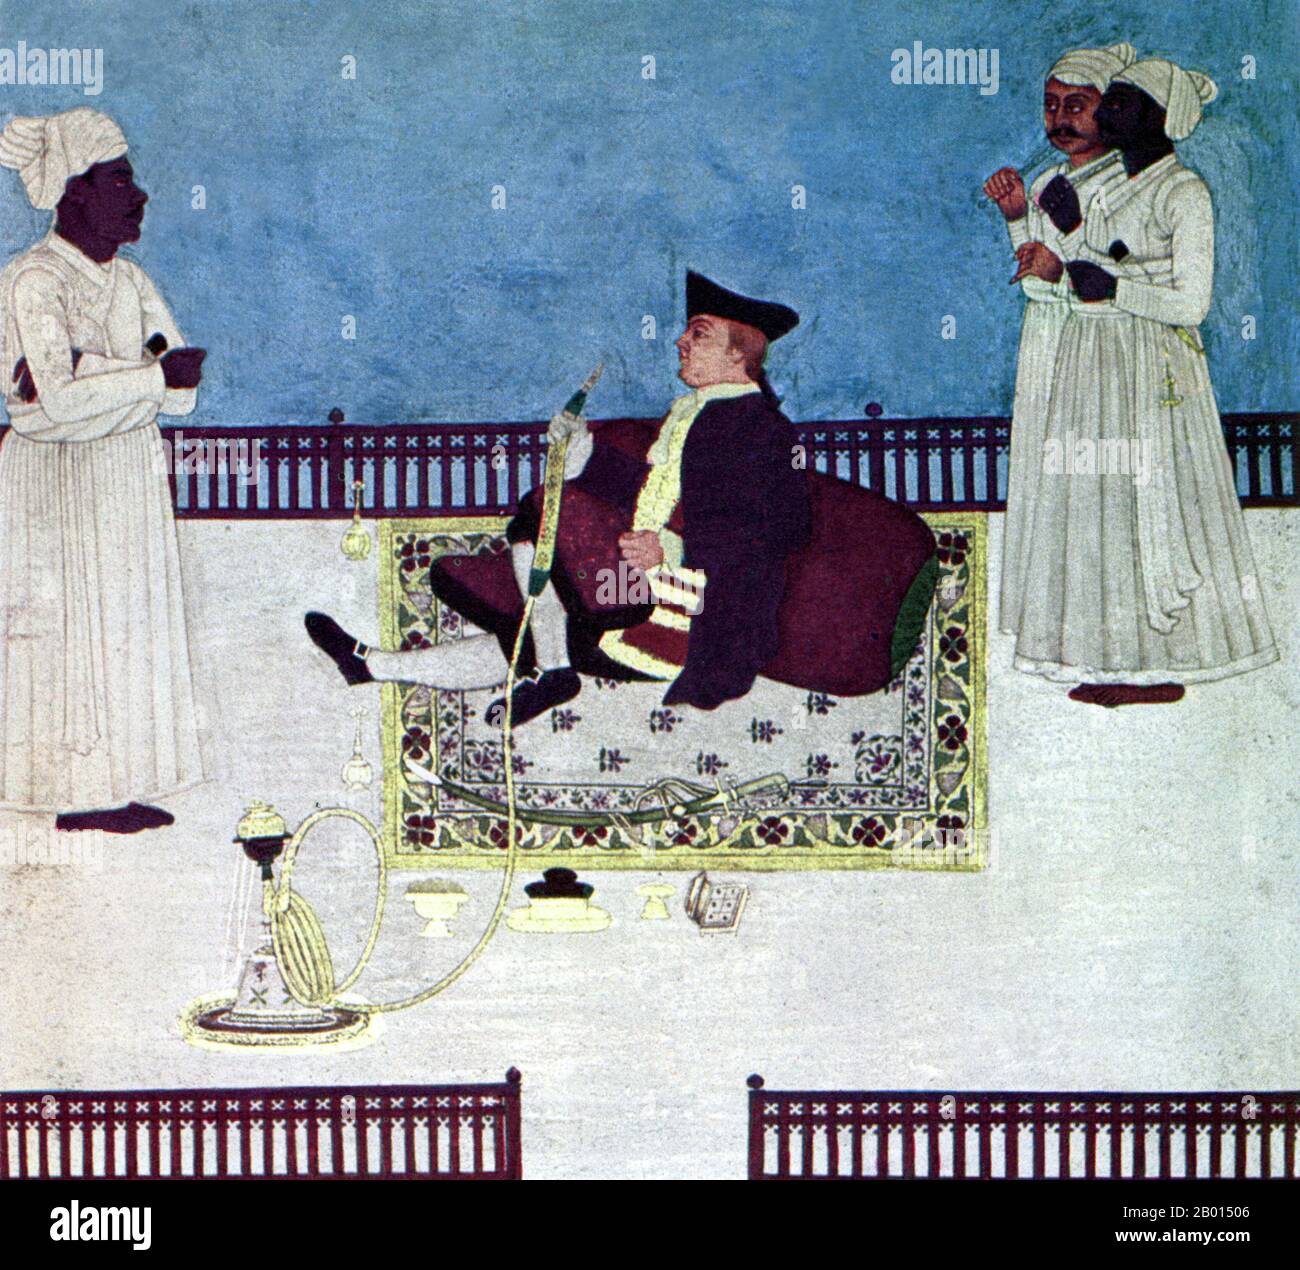 India: An English official of the British East India Company relaxes by smoking a hookah in India. Watercolour painting by Dip Chand (fl. 18th century), c. 1760-1764.  Soon after the defeat of the Spanish Armada in 1588, a group of London merchants presented a petition to Queen Elizabeth I for permission to sail to the Indian Ocean. Despite early sailing disasters, the East India Company was formed in 1600. It became the British East India Company after the Treaty of Union in 1707. It was a joint-stock company that was formed initially for pursuing trade with the East Indies. Stock Photo